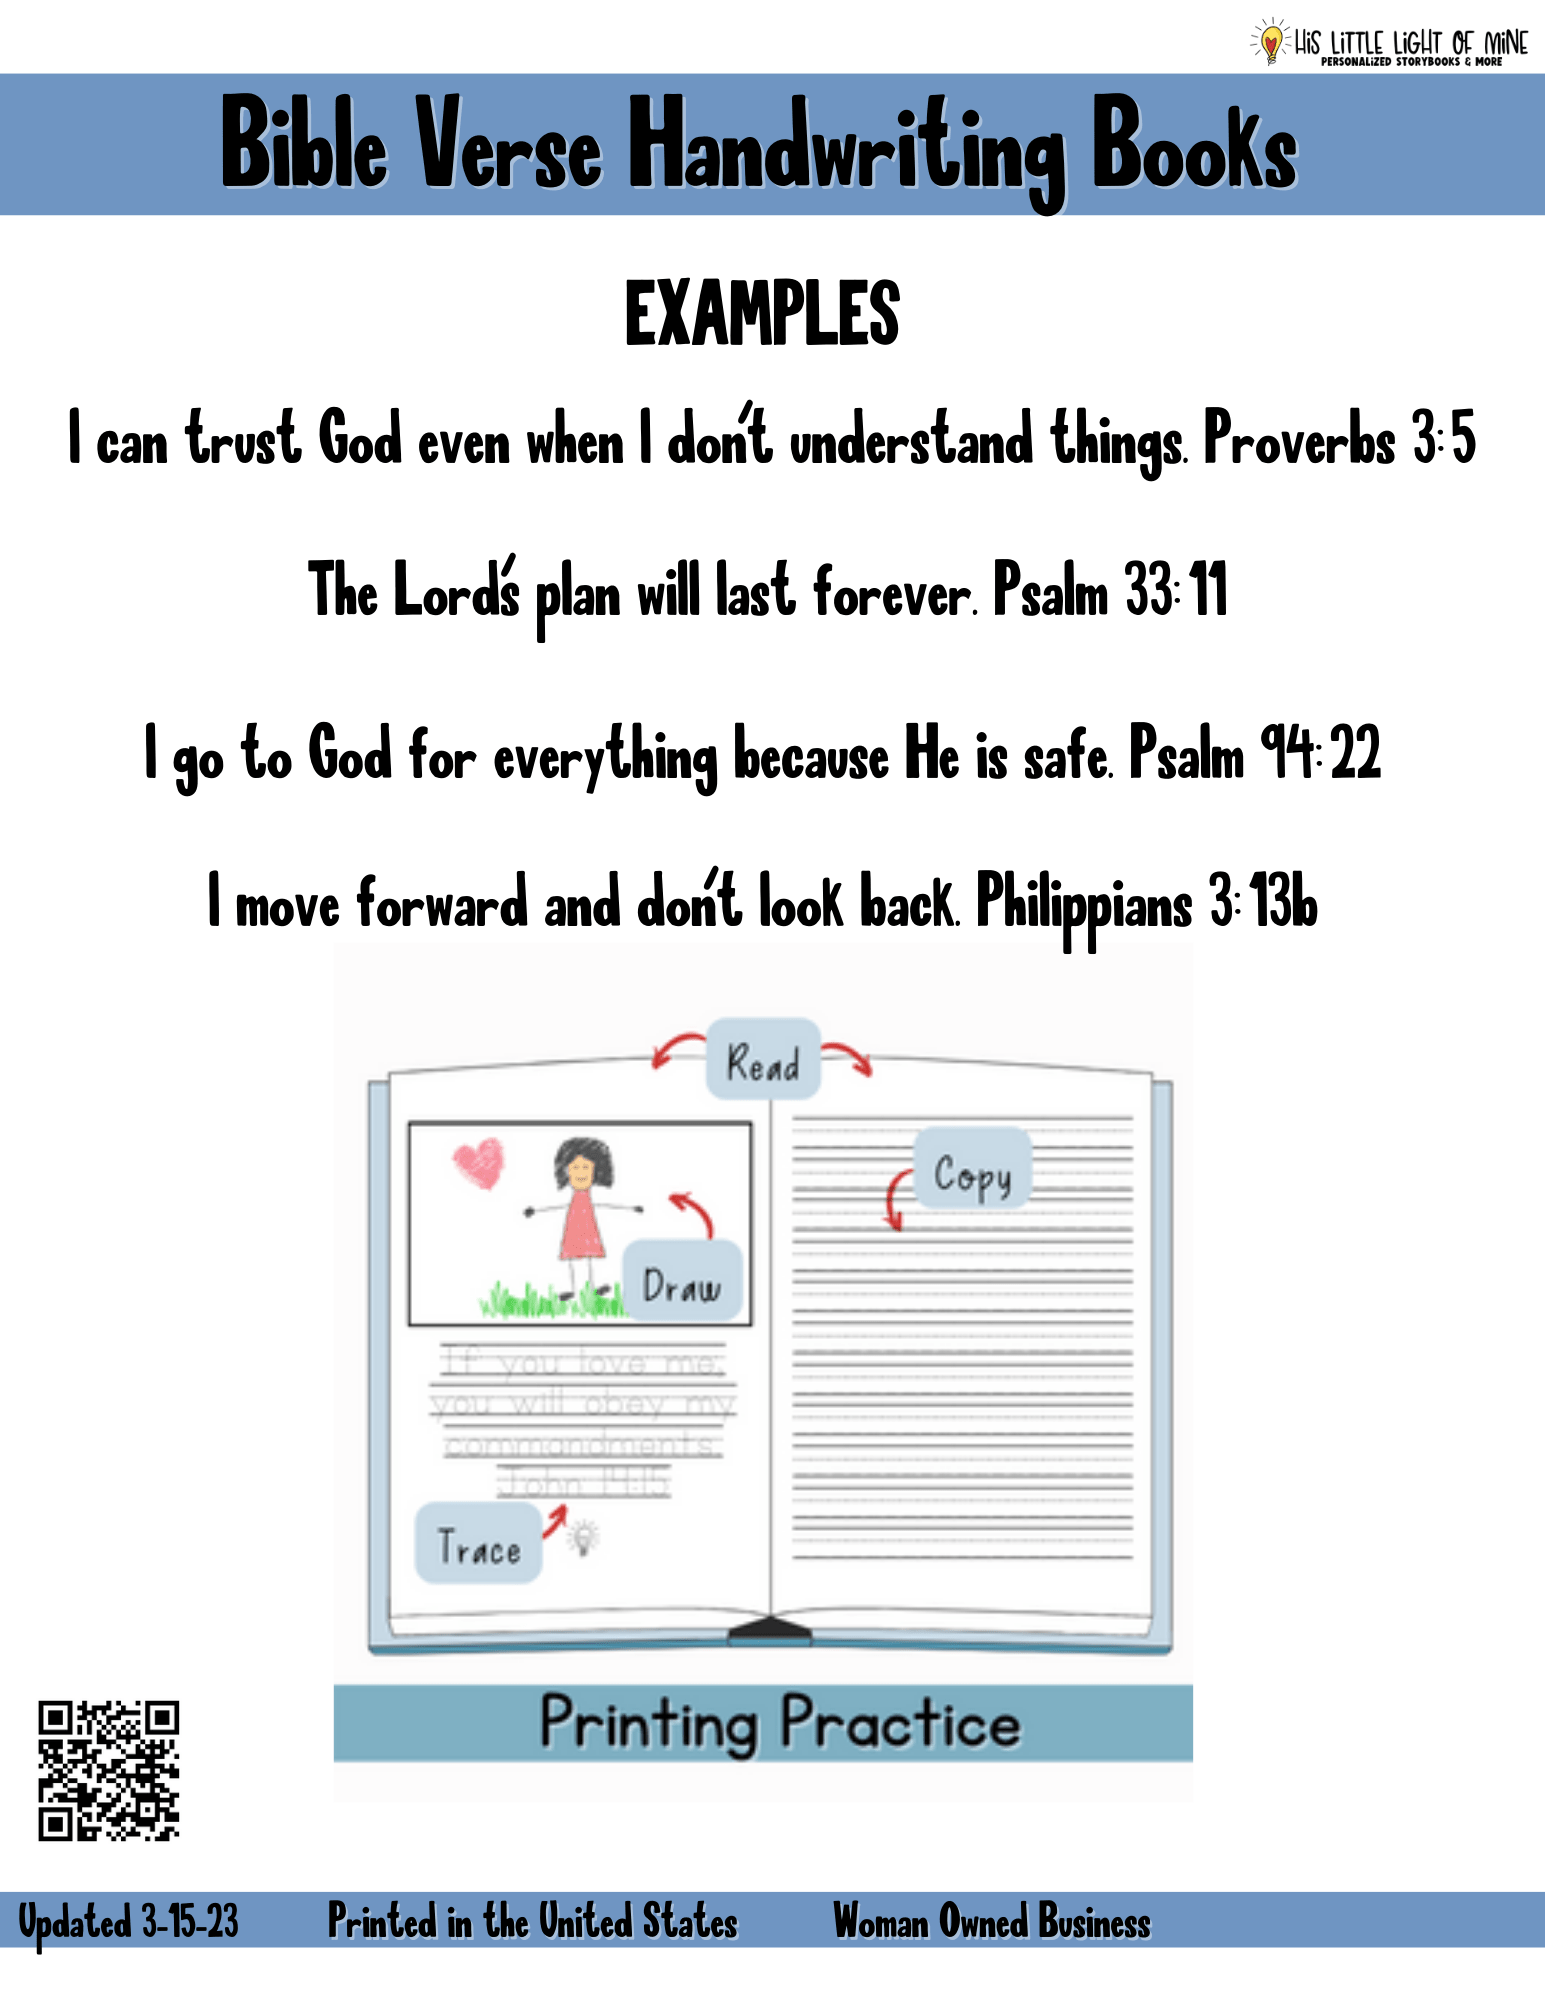 Bulk Examples of paraphrased Bible verses and interior in the Bible Verse Handwriting Books, self-published through Amazon KDP